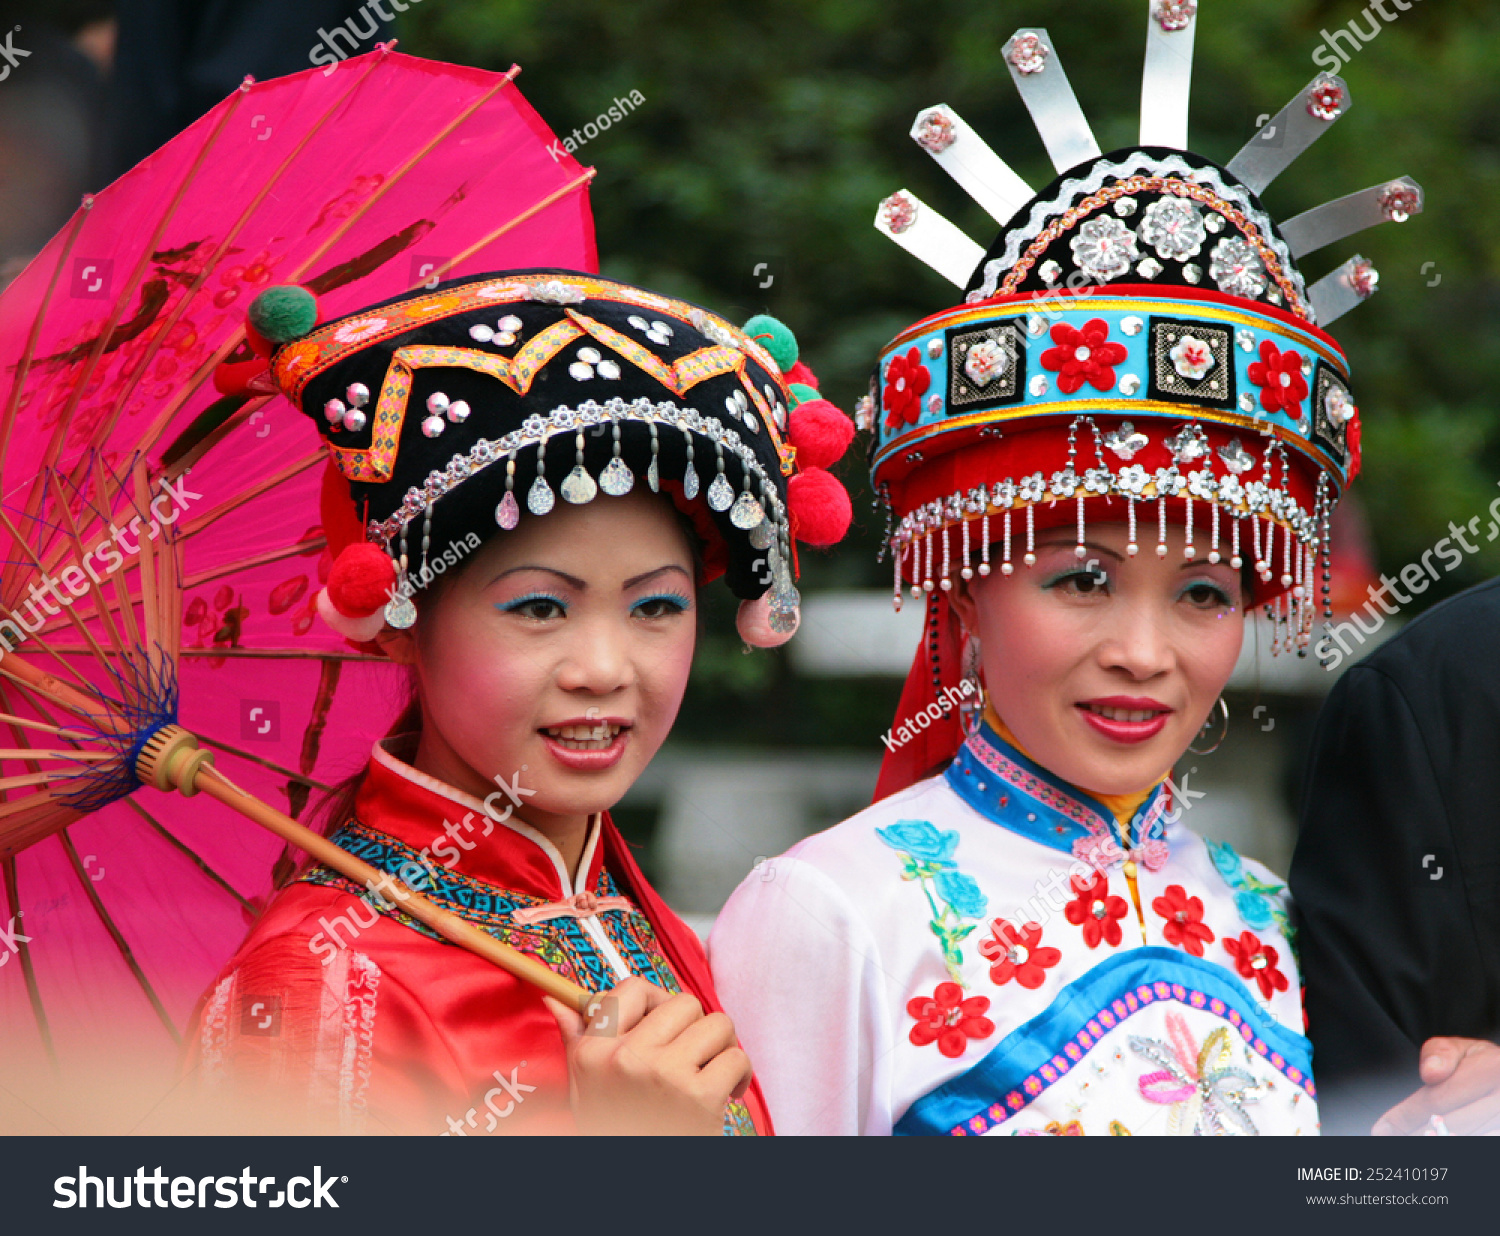 Guilin, China - Nov 4, 2007: Two Young Chinese Woman In Stylized Ethnic ...